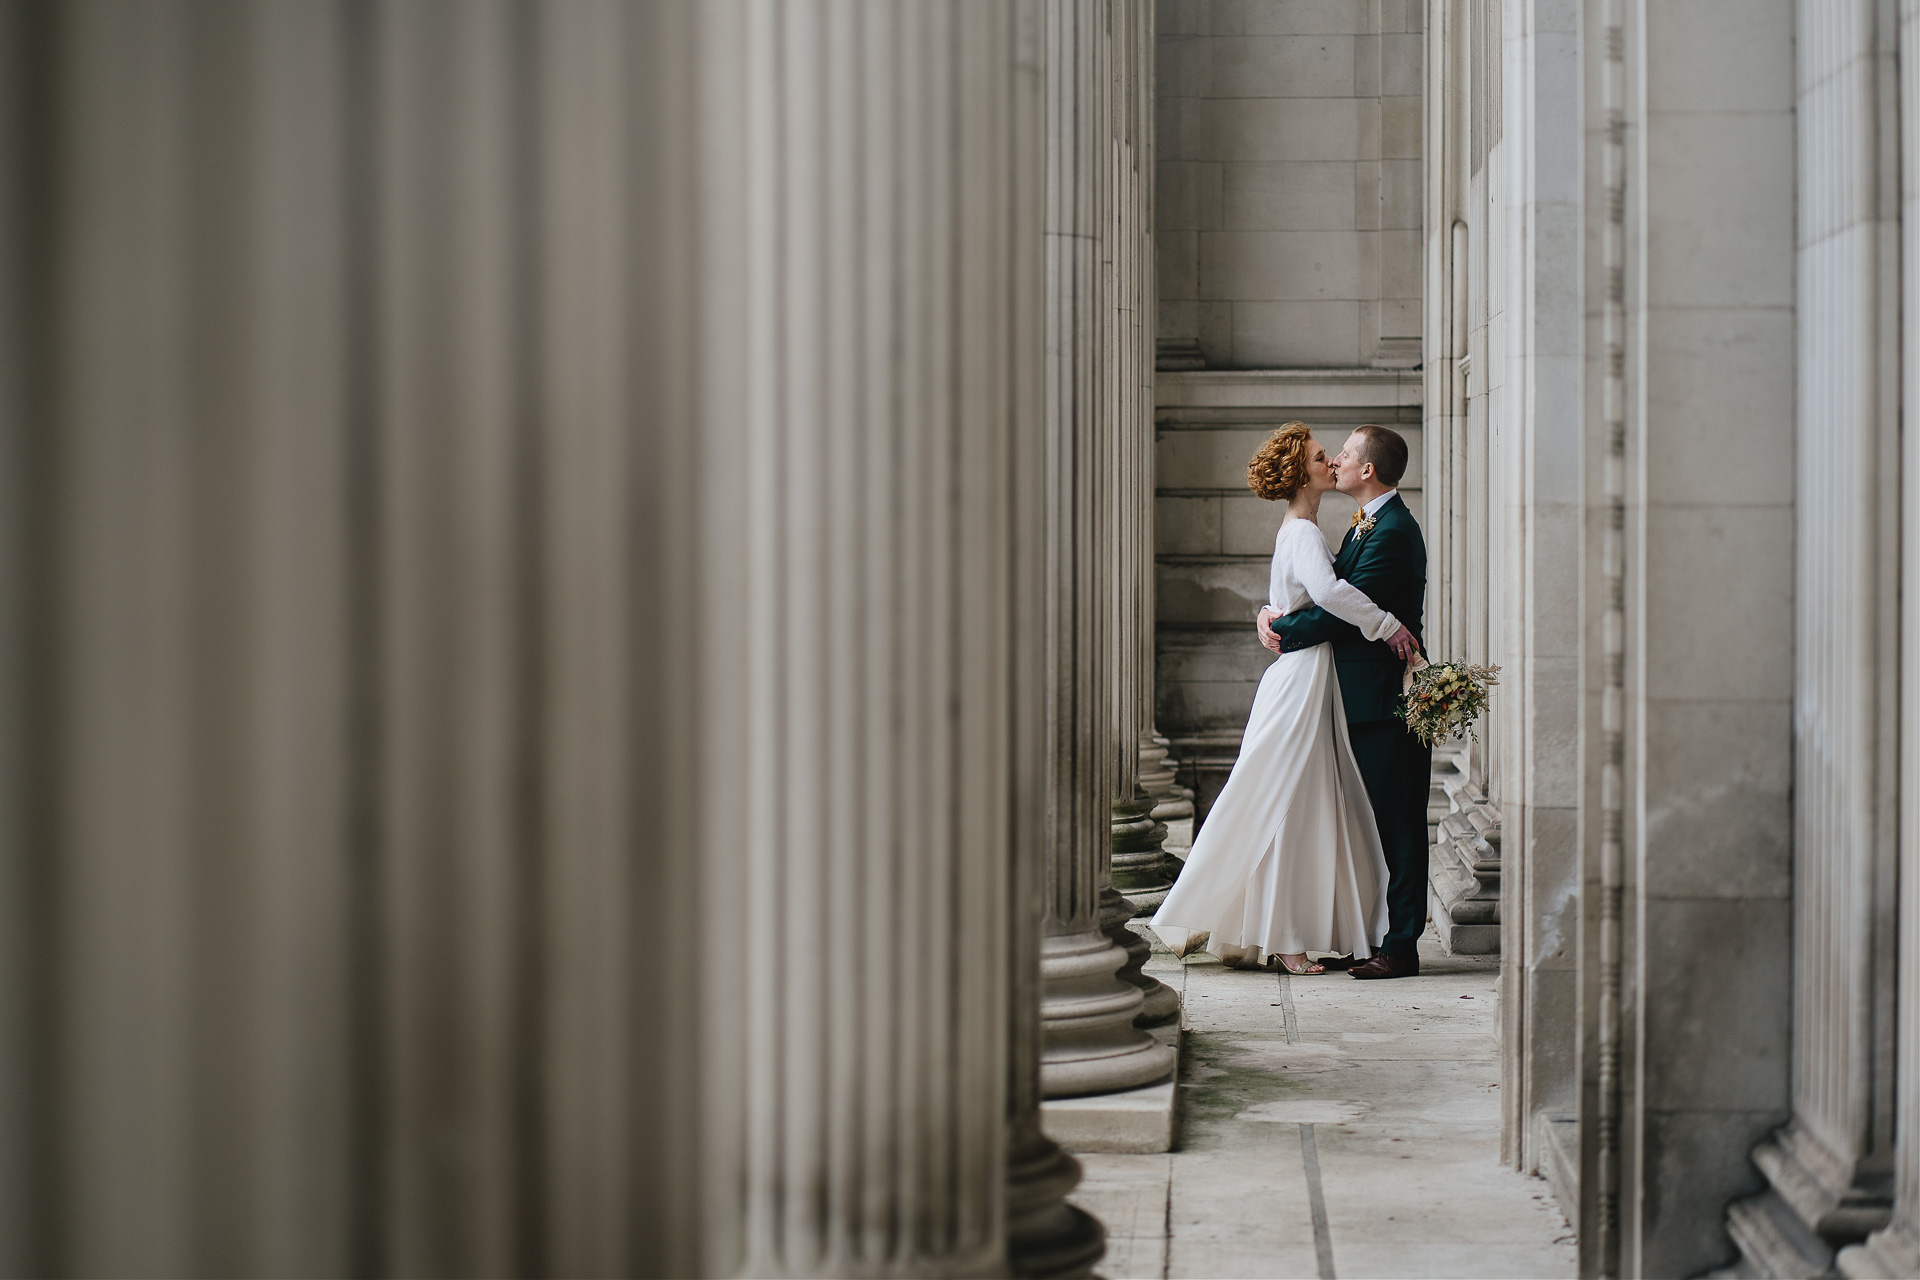 An intimate wedding celebration, with a bride and groom kissing amongst some white pillars, with nobody else around. 